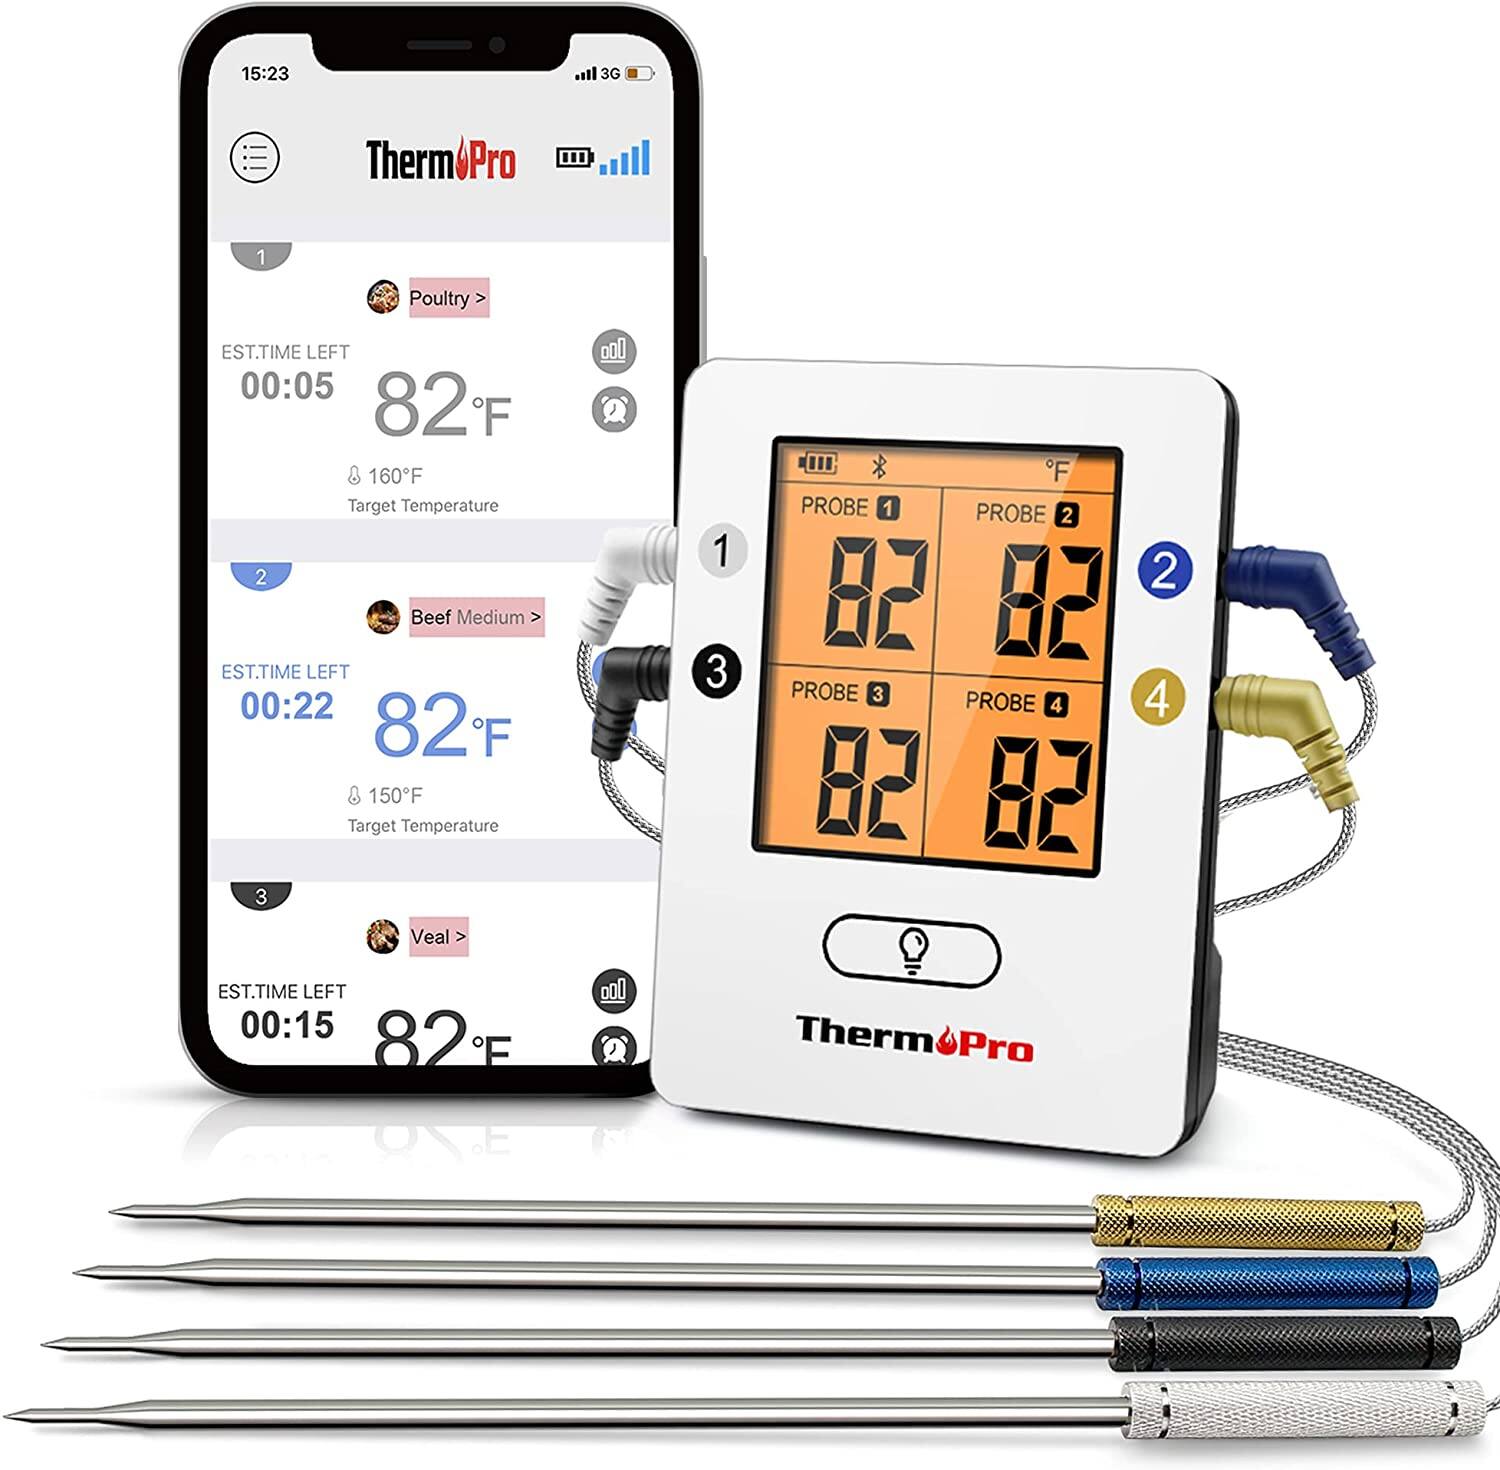 30% off on ThermoPro TP25 500ft Wireless Bluetooth Meat Thermometer with 4 Probes Smart Cooking BBQ Thermometer for Grilling Oven Food Smoker Thermometer $43.34